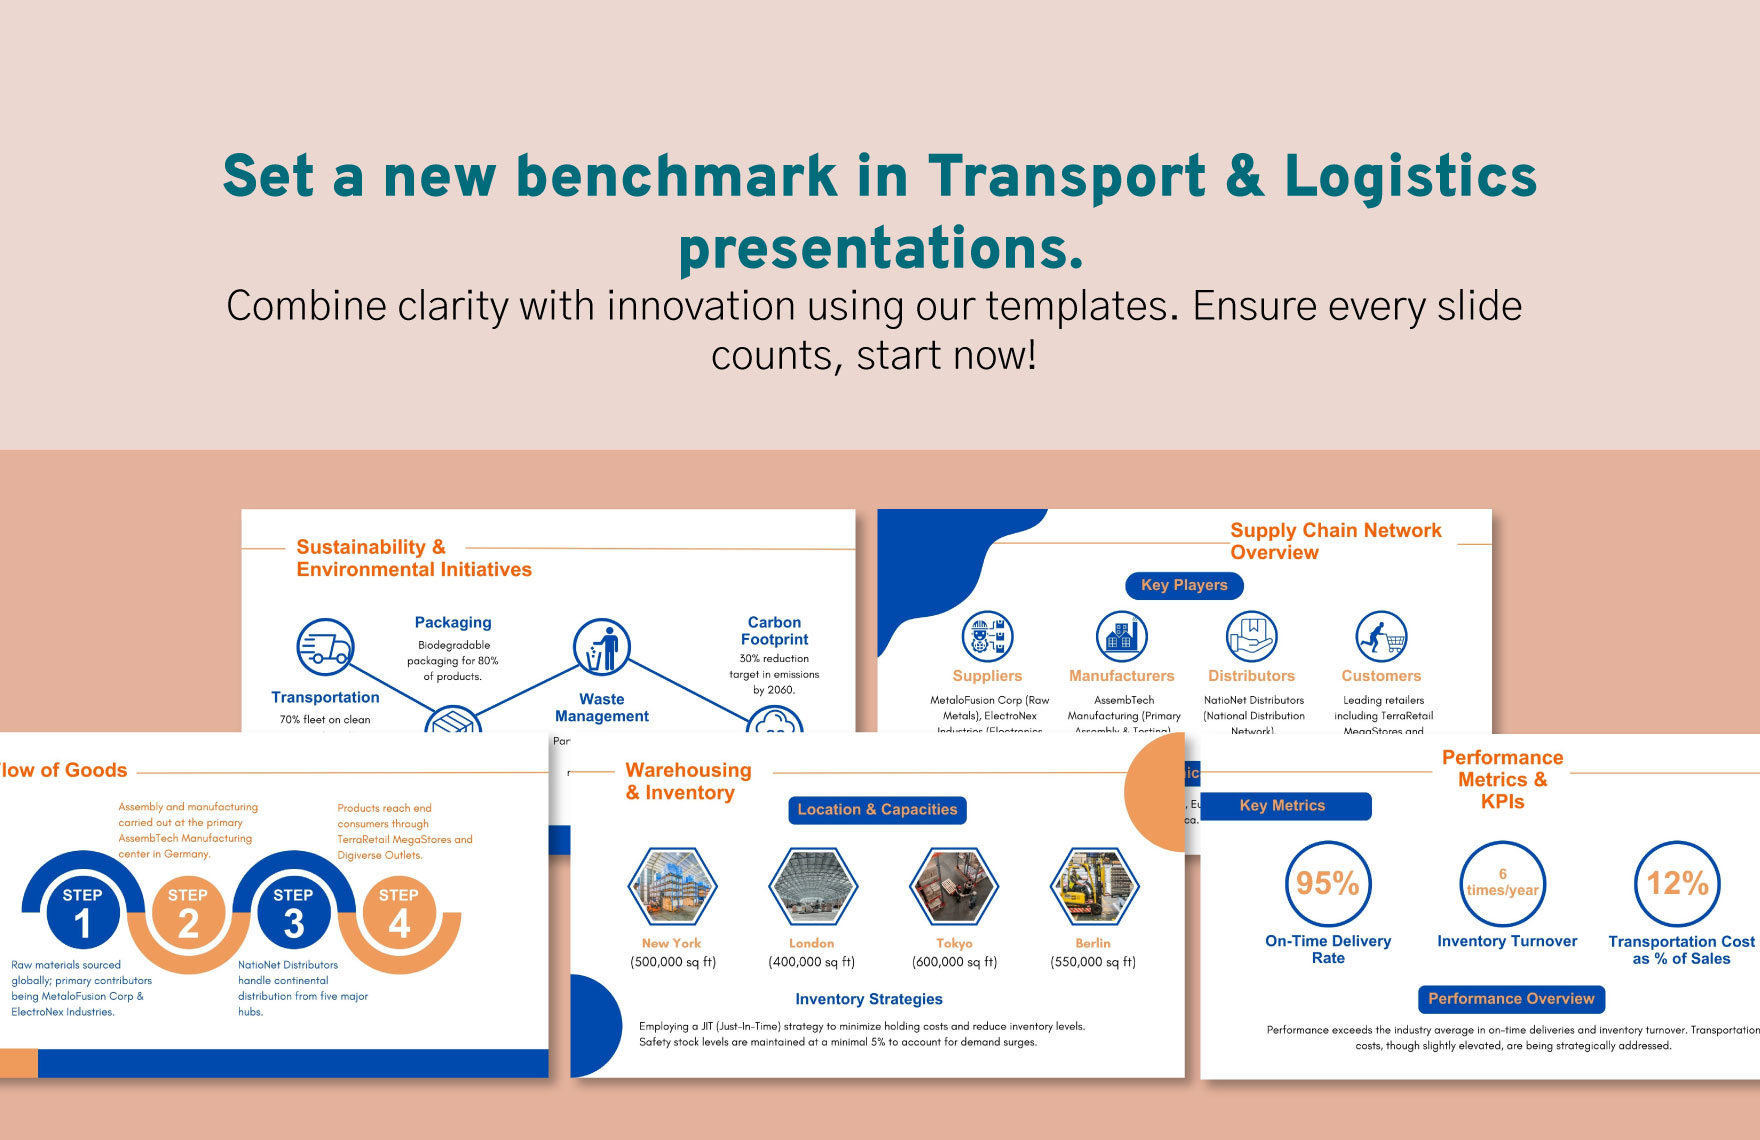 Transport and Logistics Supply Chain Management Overview Template